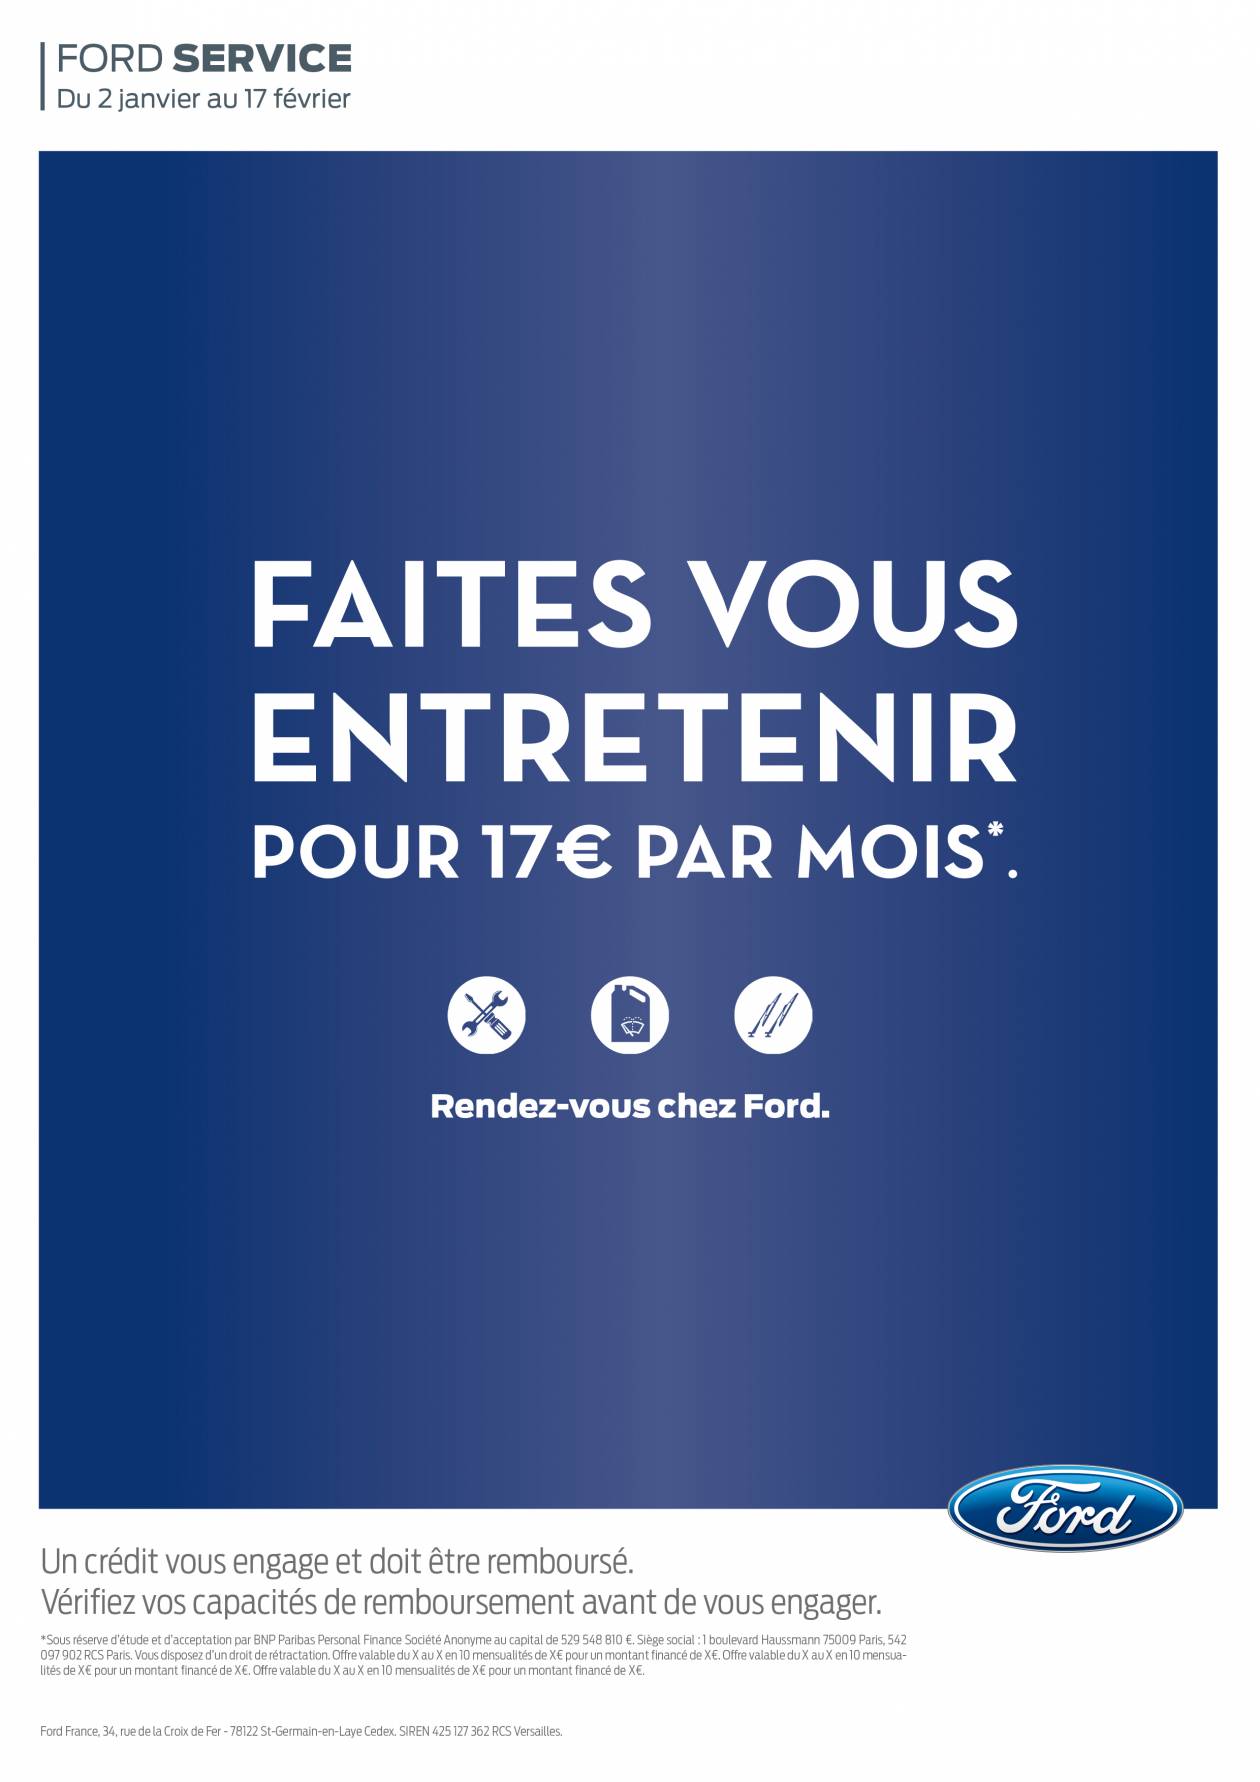 Affiche Ford Services